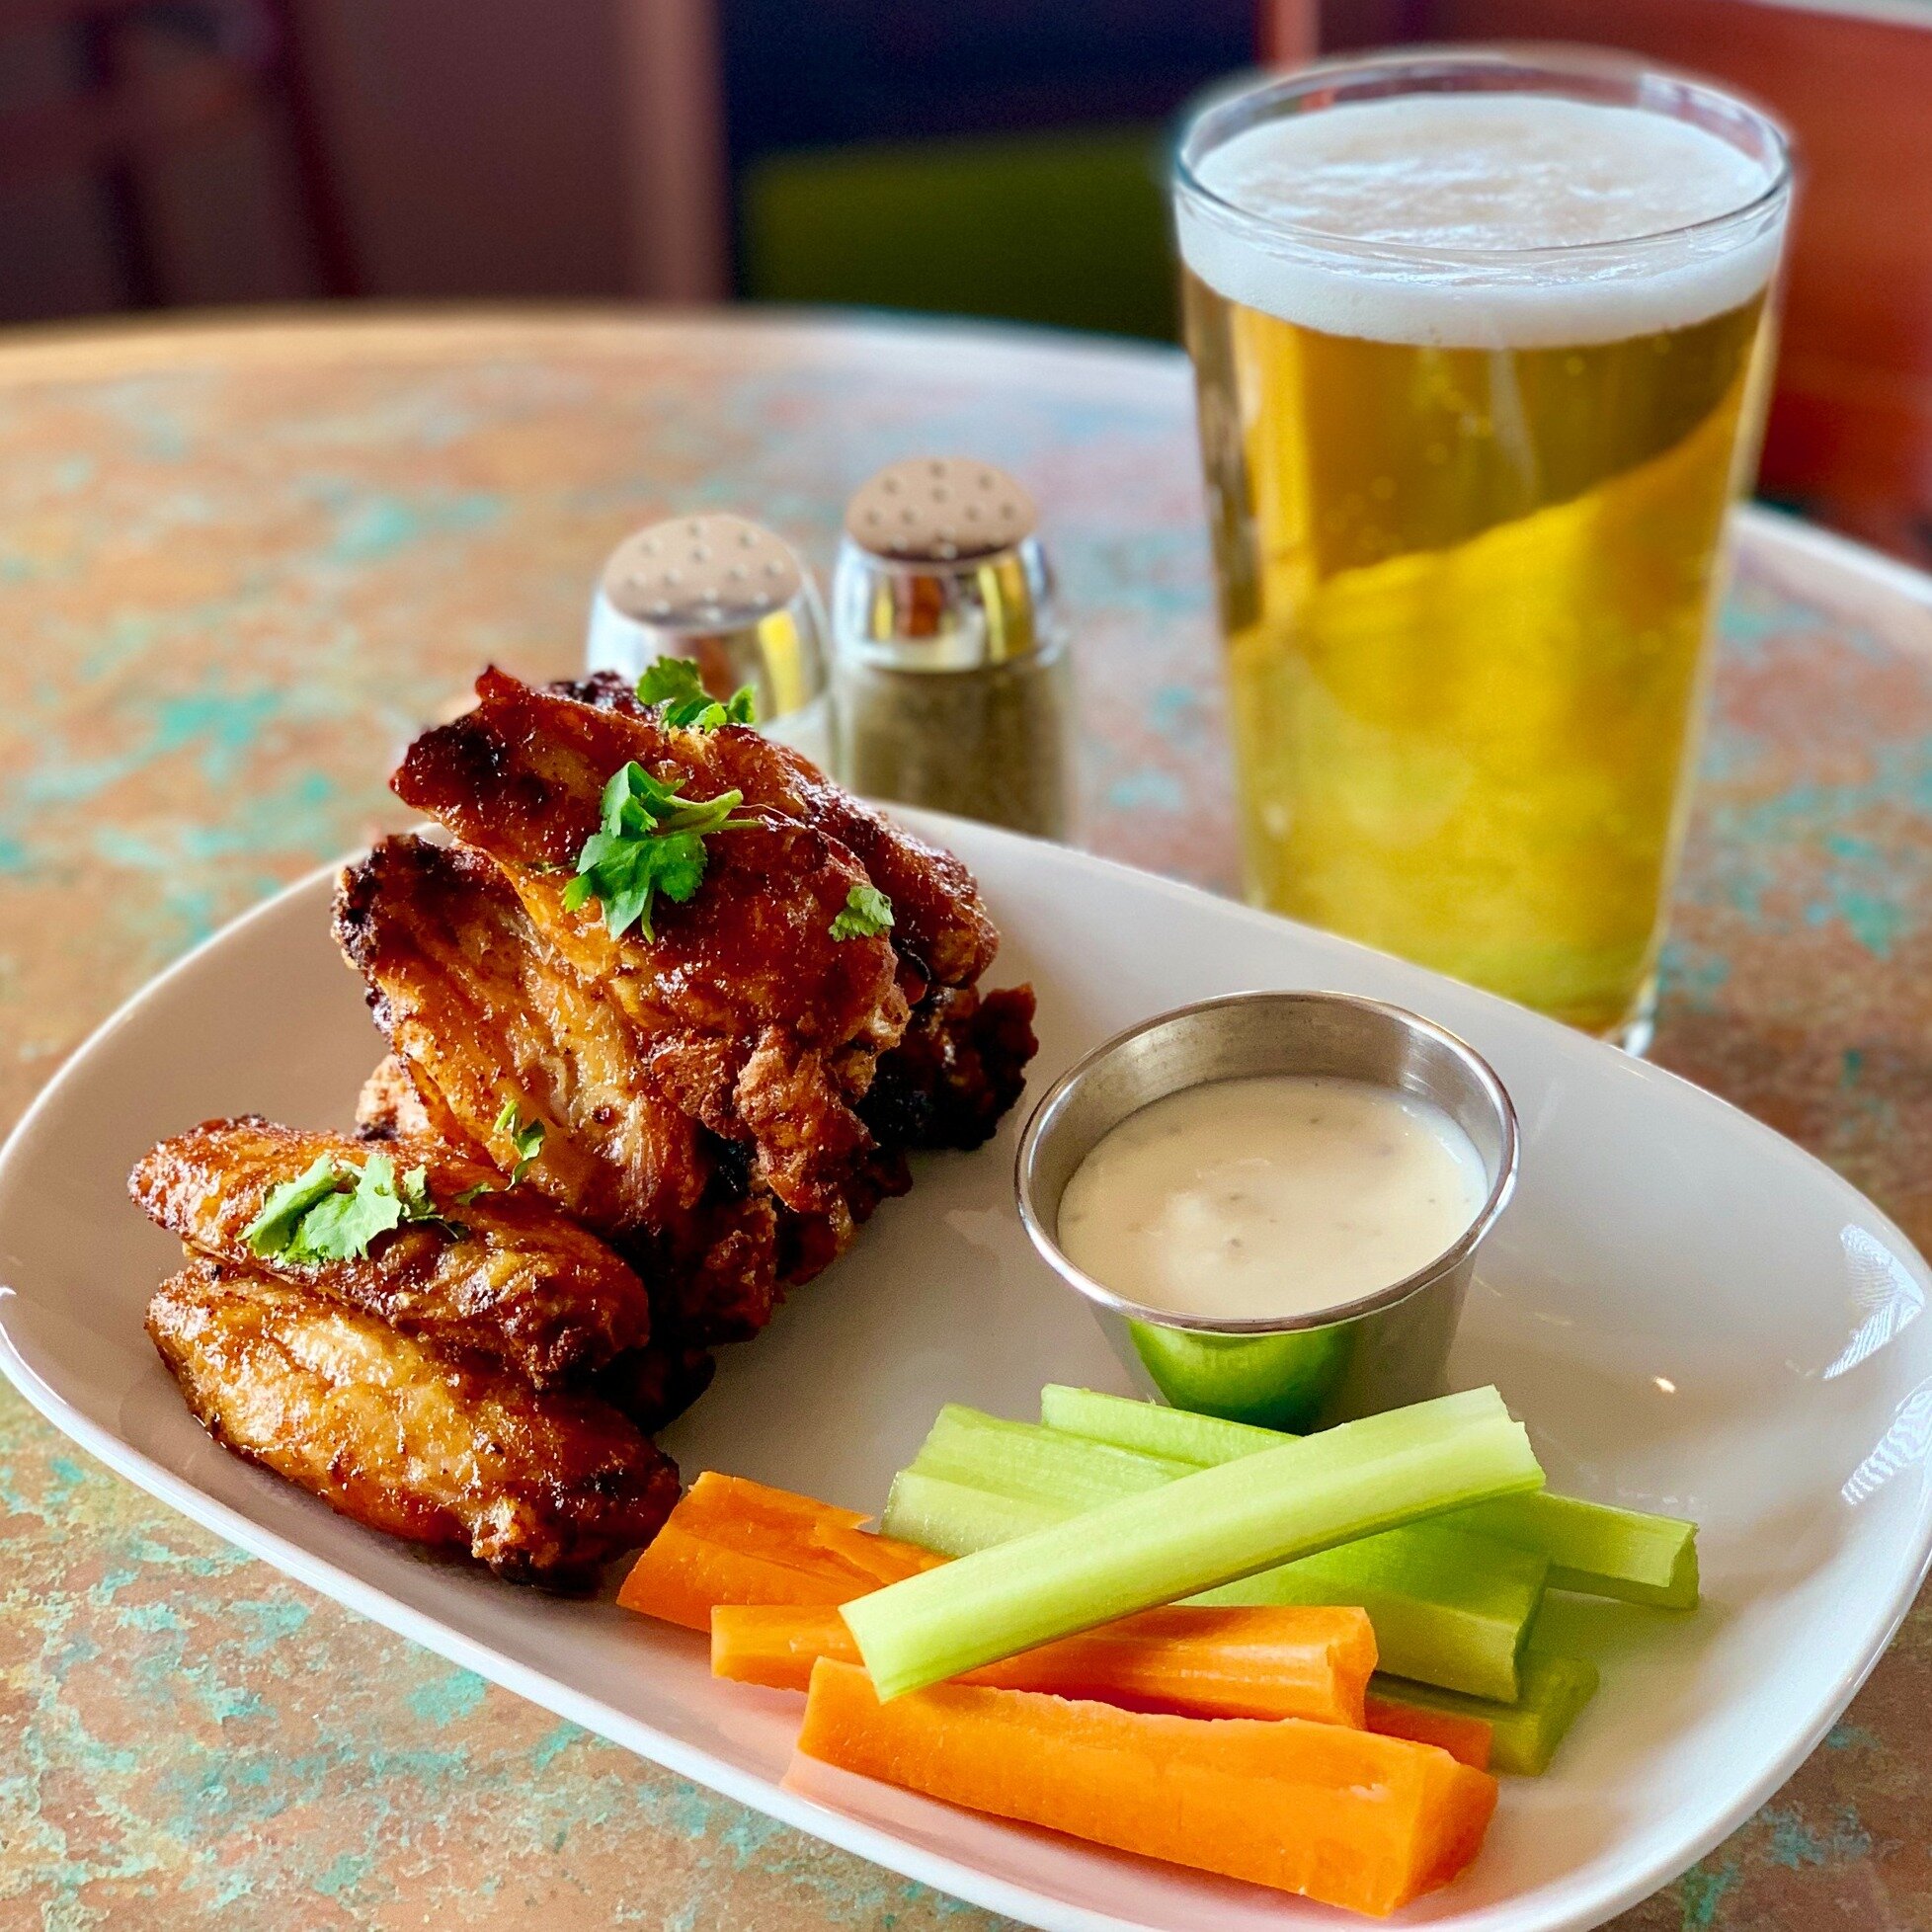 TC's Pub is OPEN for lunch and dinner weekdays from noon-10pm (kitchen open until 9pm) and for dinner on Saturdays from 4-10pm (kitchen open until 9pm)
.
Come join us for favourites like TC&rsquo;s Famous Wings! Available in the following flavours, F